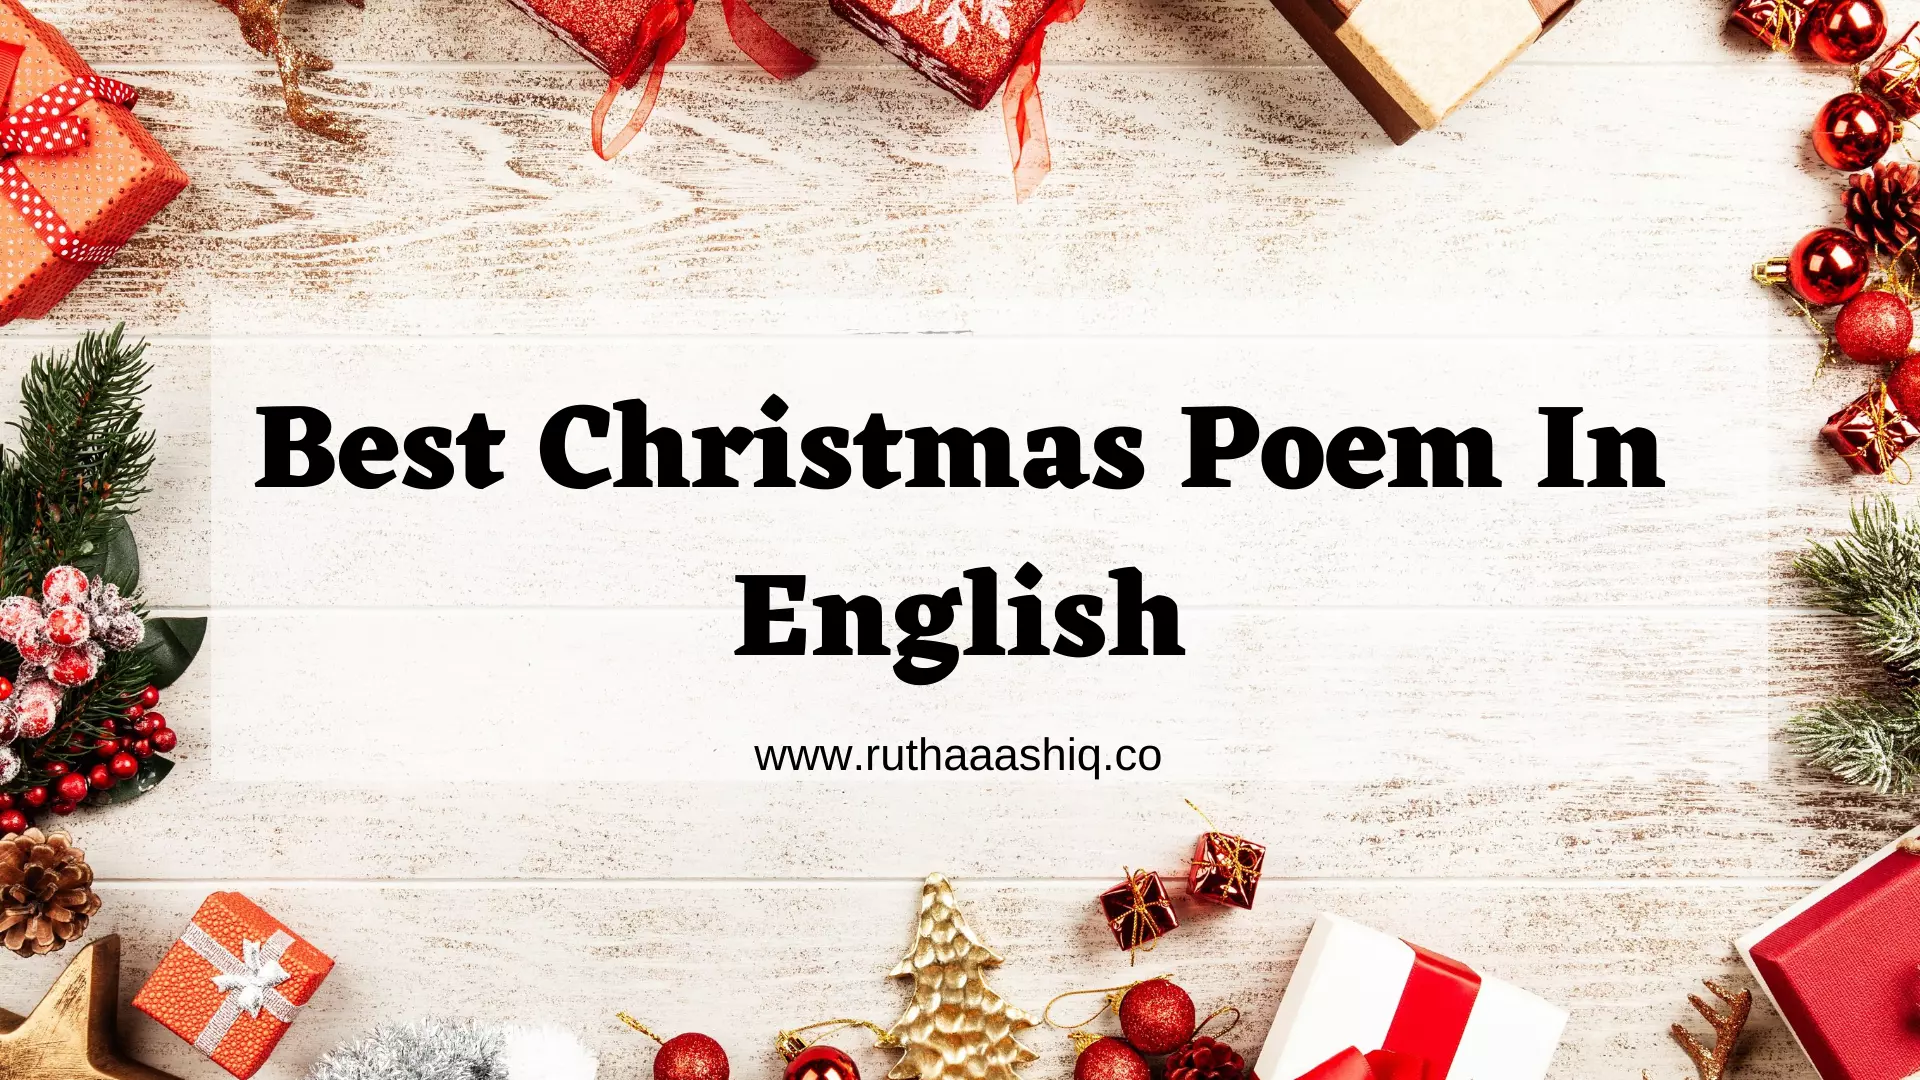 Best Christmas Poem In English